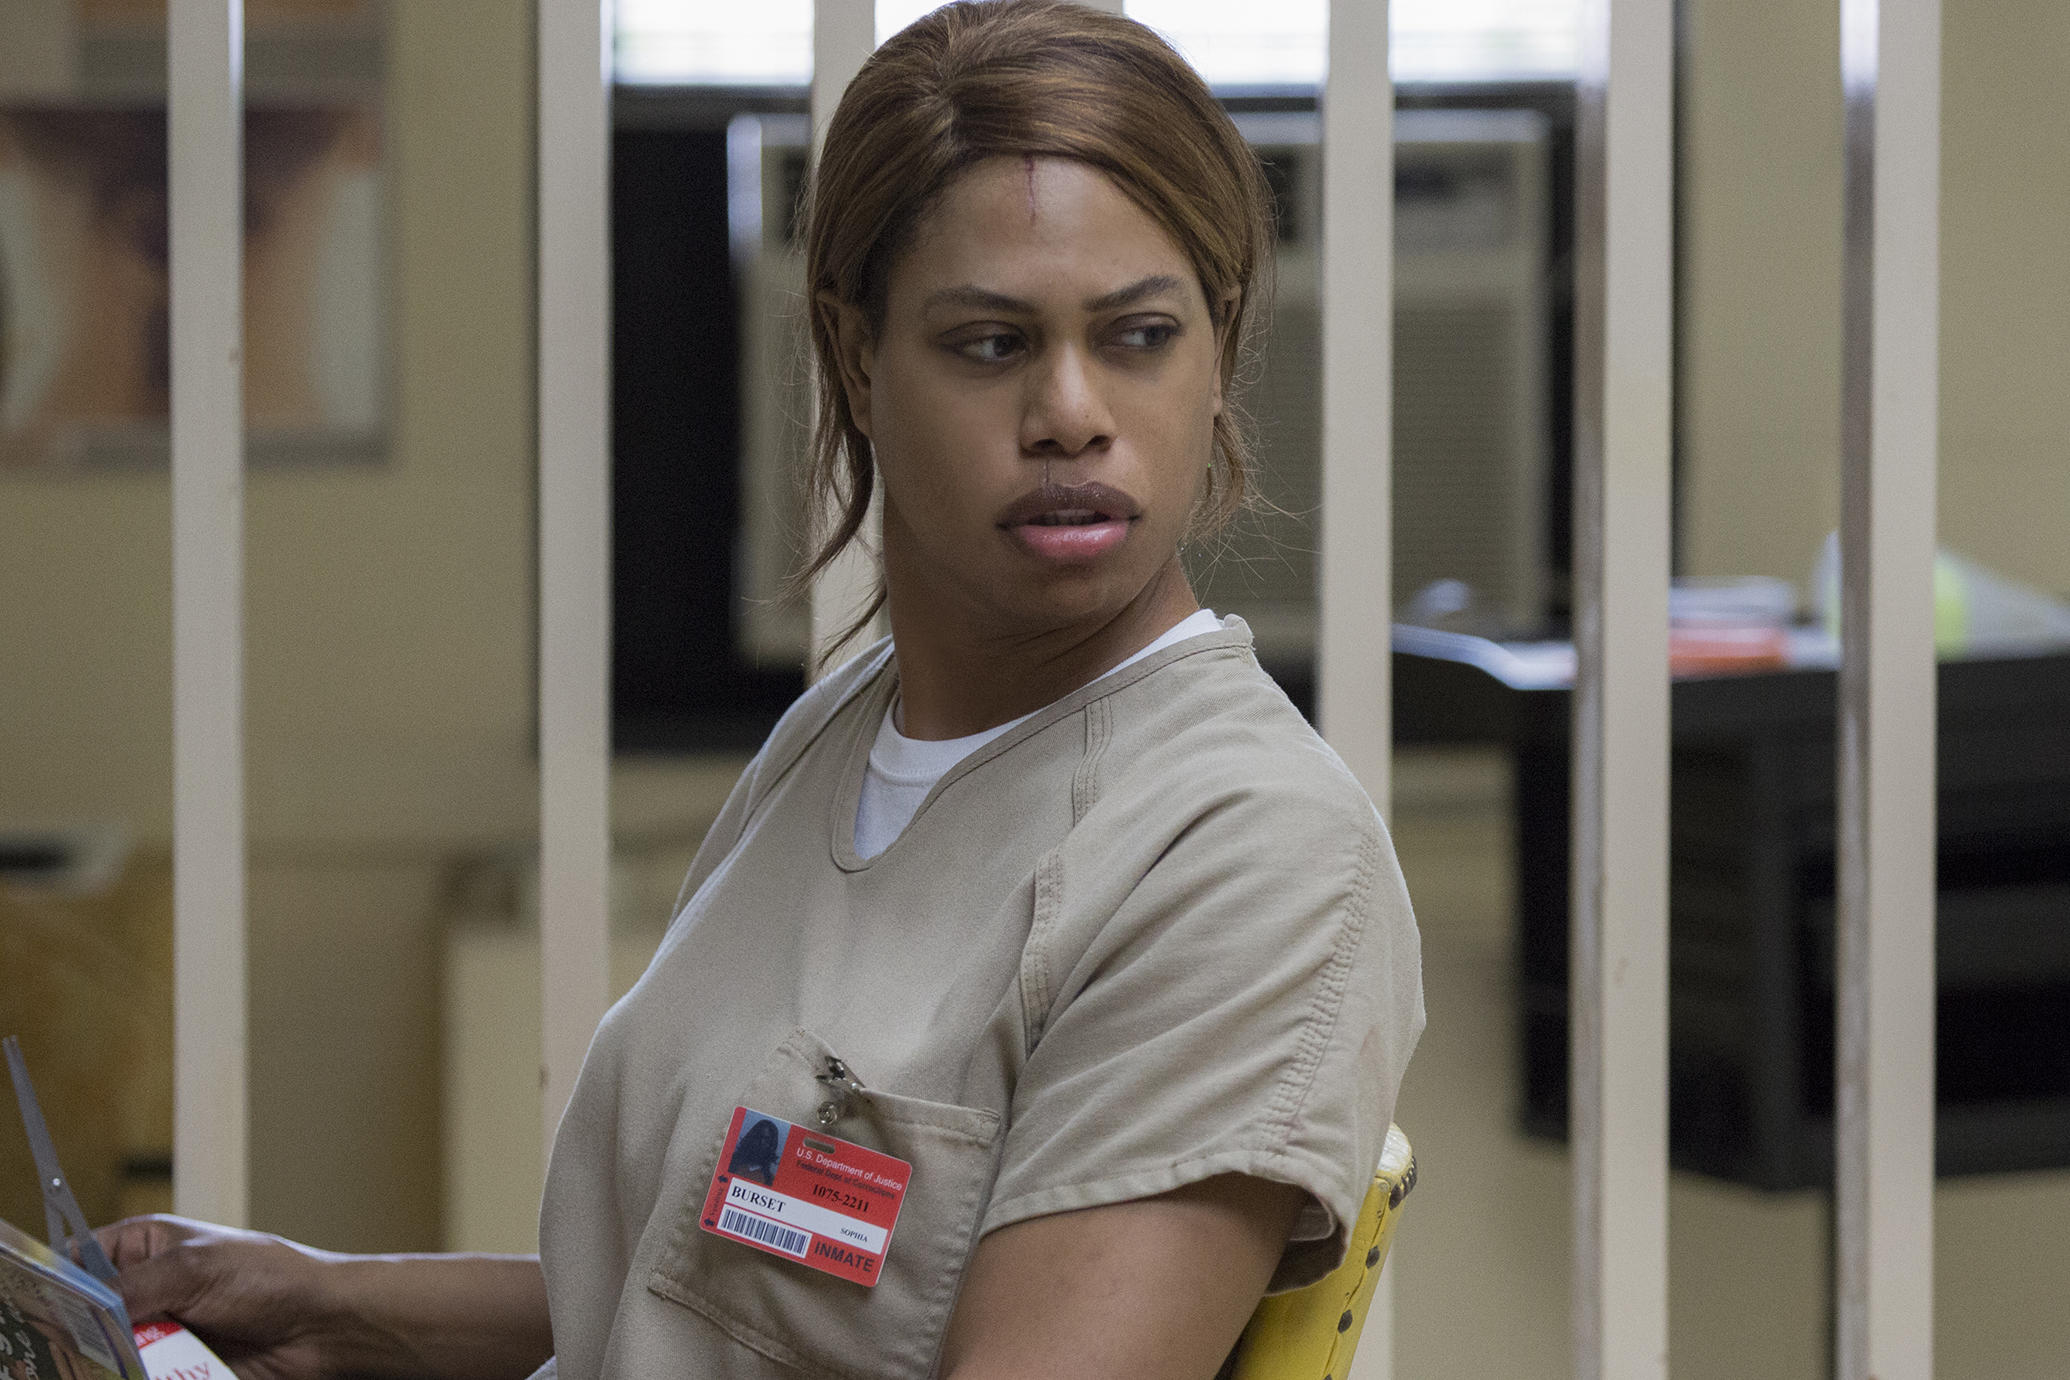 orange is the new black show news videos full episodes